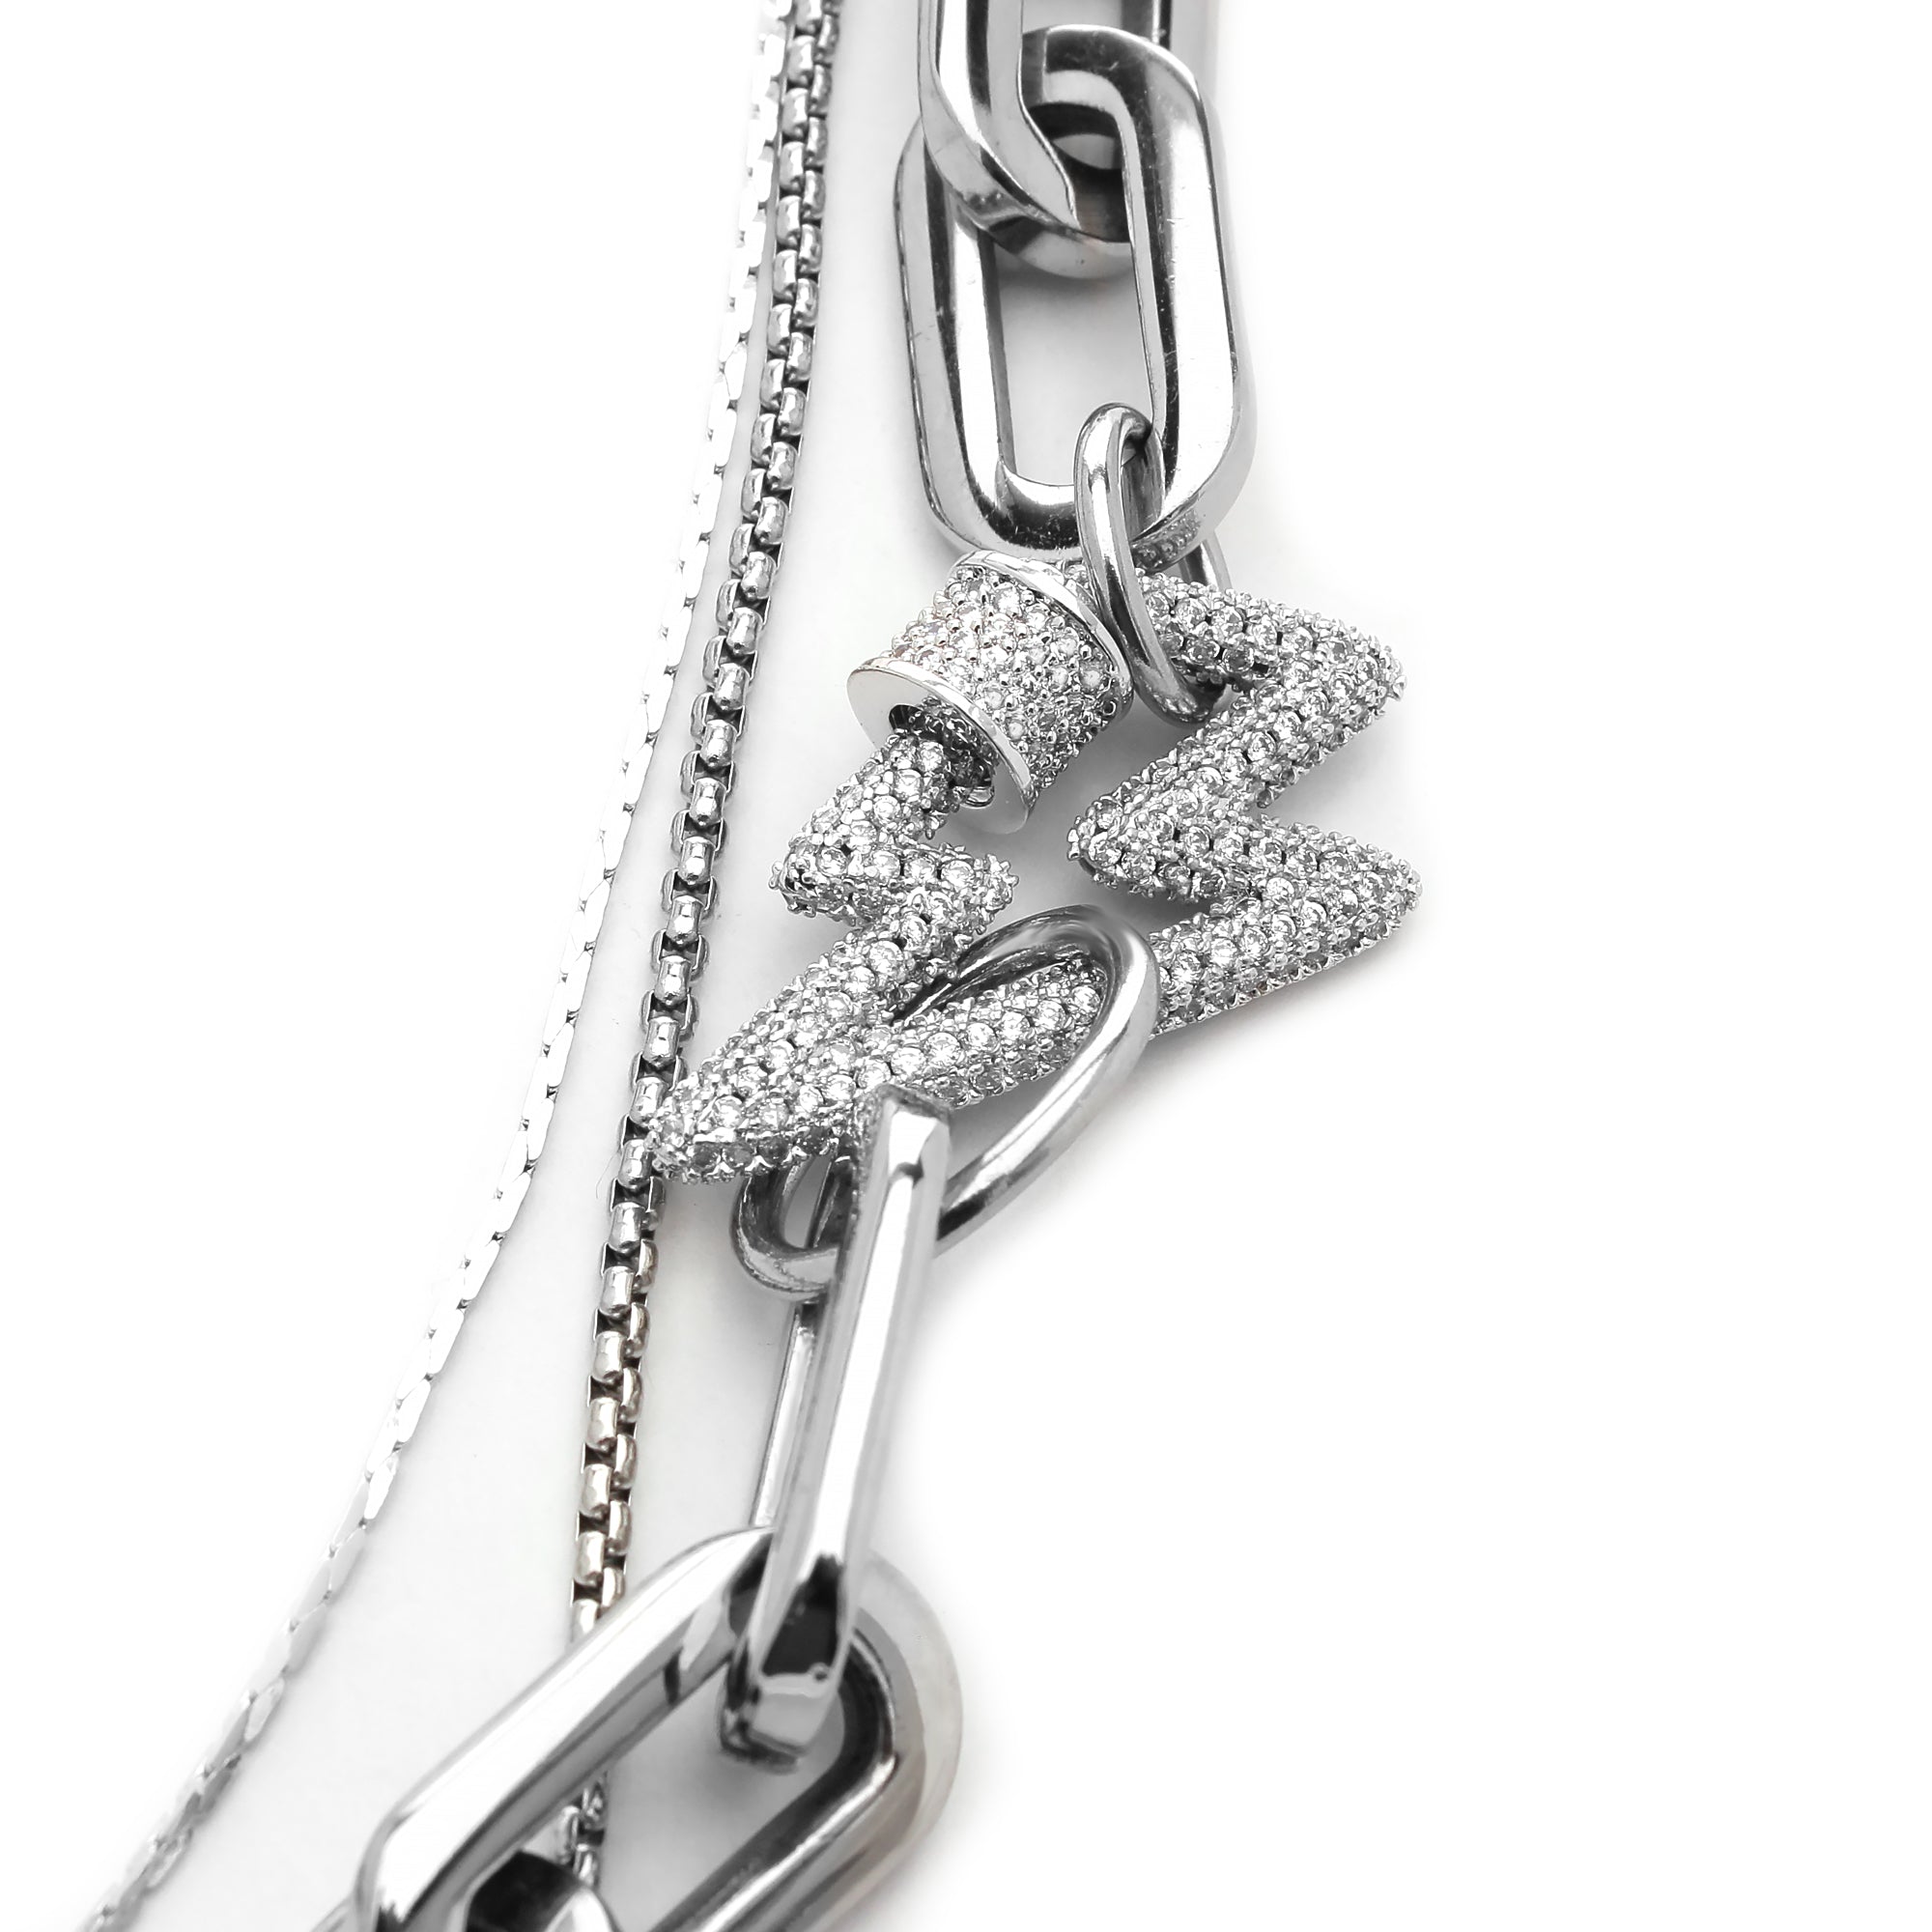 Louis Vuitton, Jewelry, Louis Vuitton Padlock On Silver Stainless Steel  Necklace With A Second Necklace